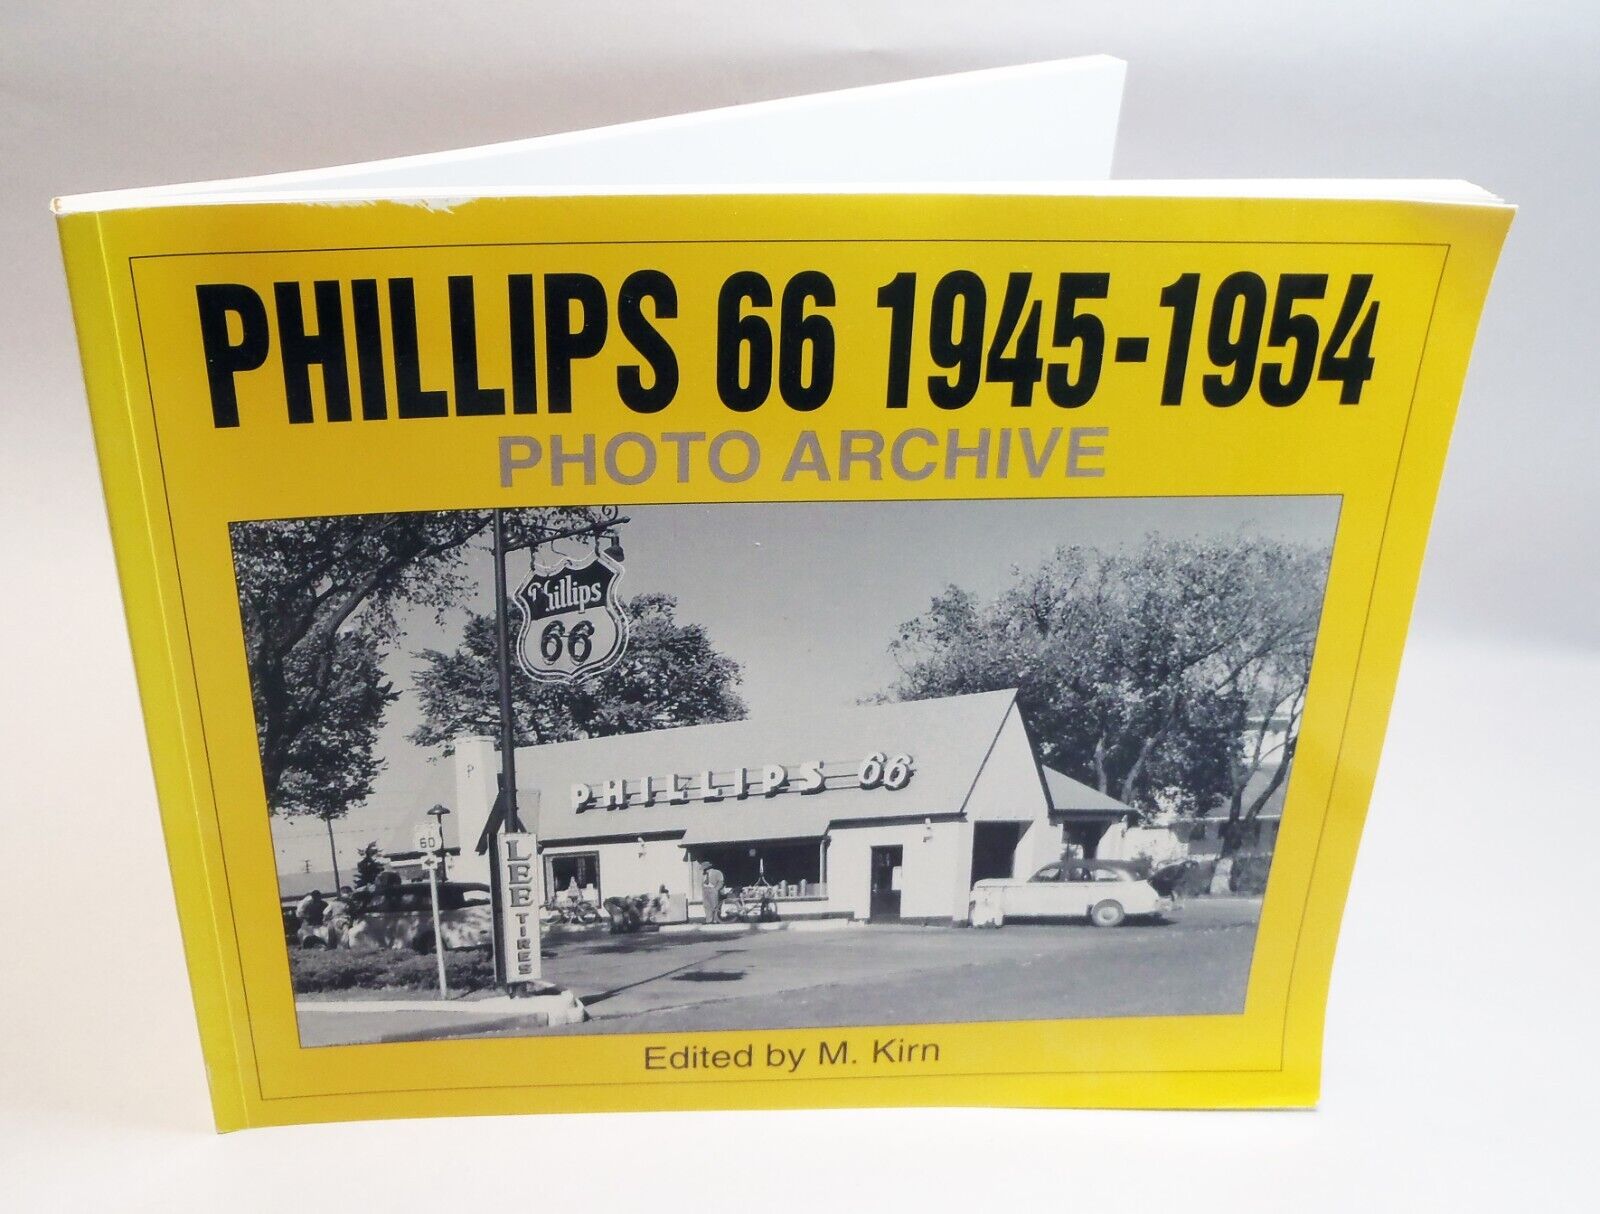 Phillips 66 1945-1954 Photo Archive: Collectibles Photo Catalog by KIRN